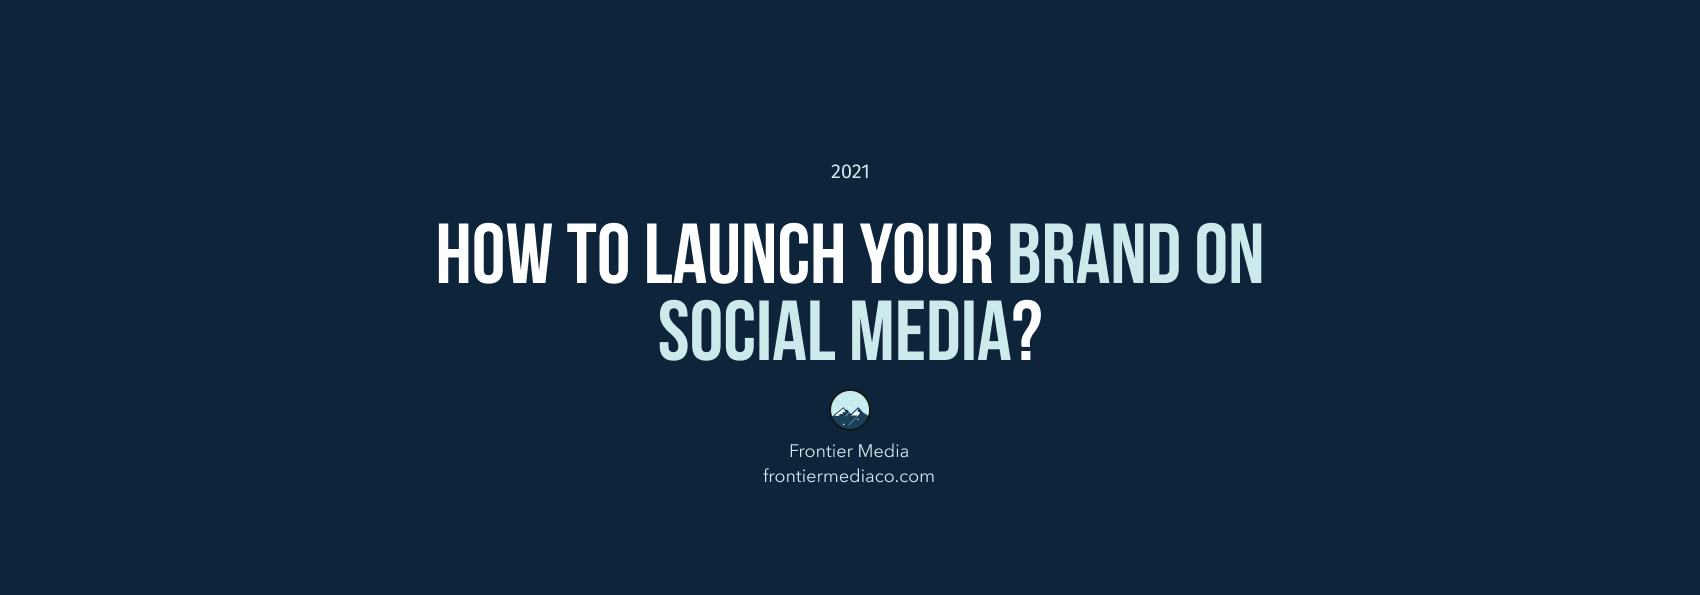 How to Launch Your Brand on Social Media?